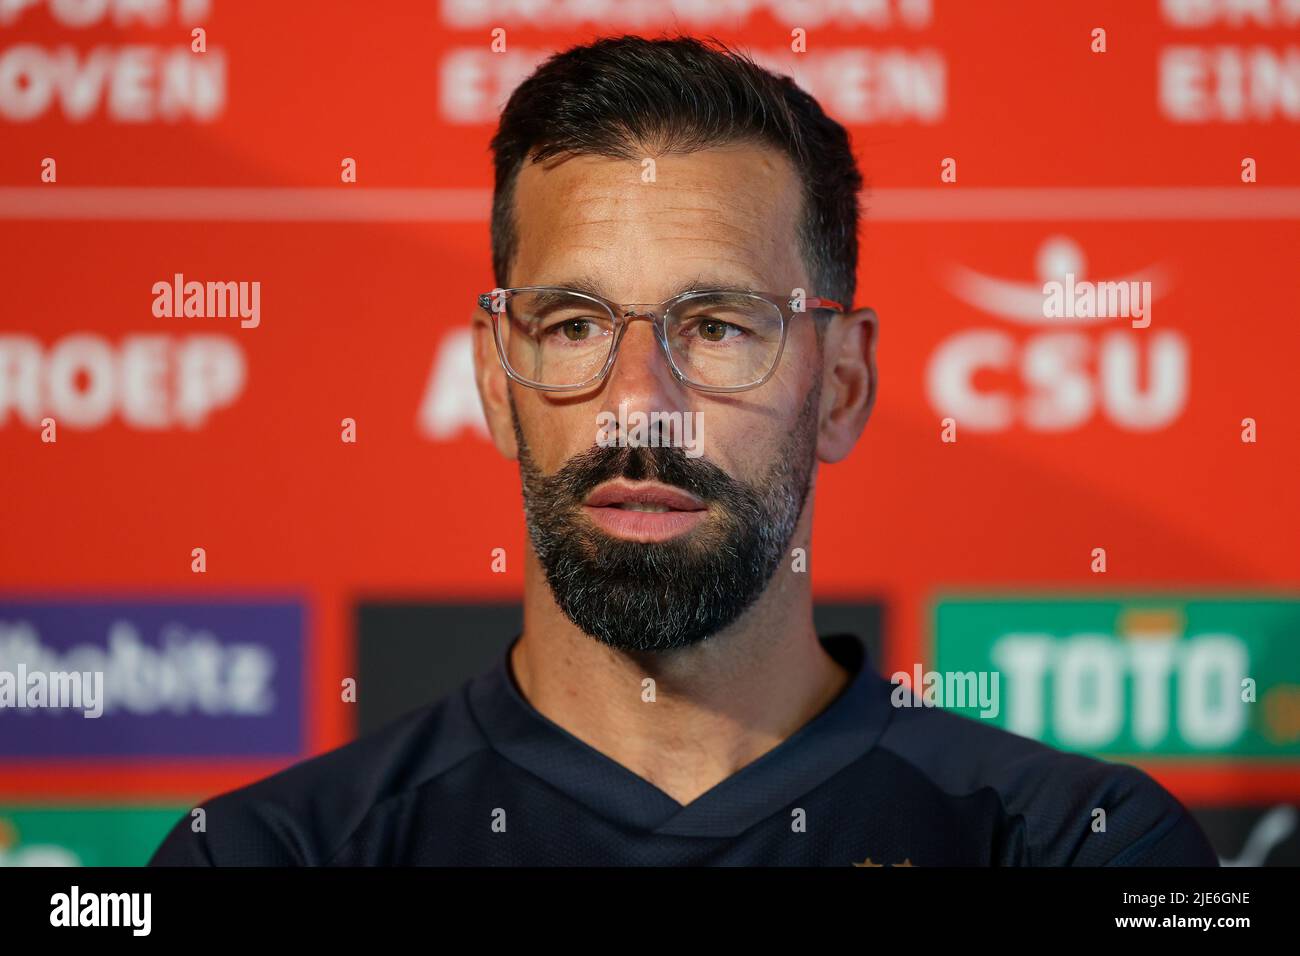 EINDHOVEN, NETHERLANDS - JUNE 25: Headcoach Ruud van Nistelrooy of PSV  Eindhoven during the press conference after the freindly match during the  Pre Season Friendly match between PSV Eindhoven and BW Lohne